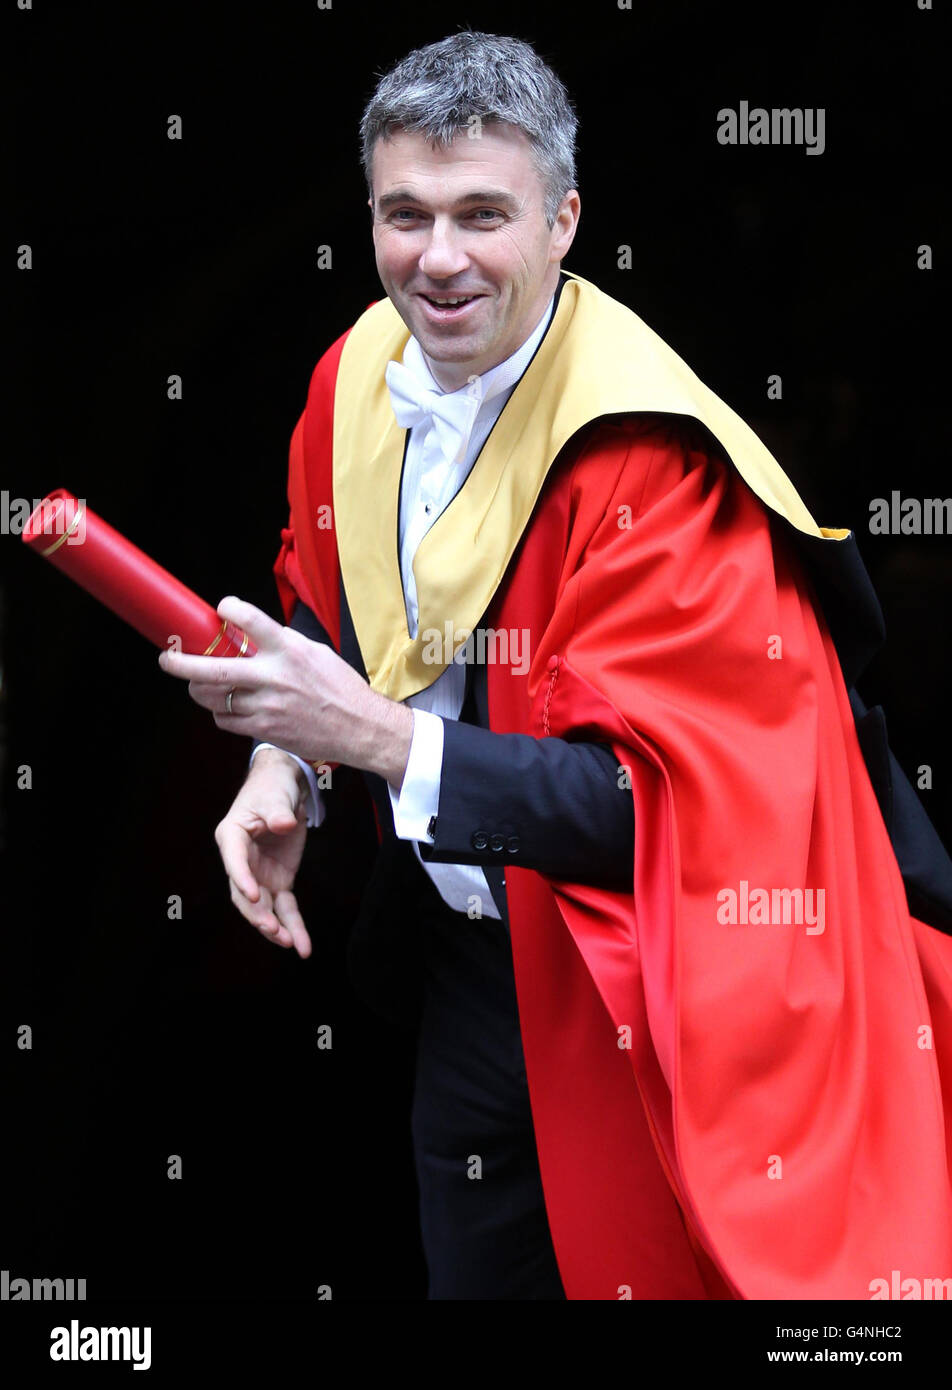 AA Chefs' Chef of the Year Martin Wishart after receiving his Honorary Doctorates from the University of Edinburgh at a ceremony in the McEwan Hall in Edinburgh. Stock Photo